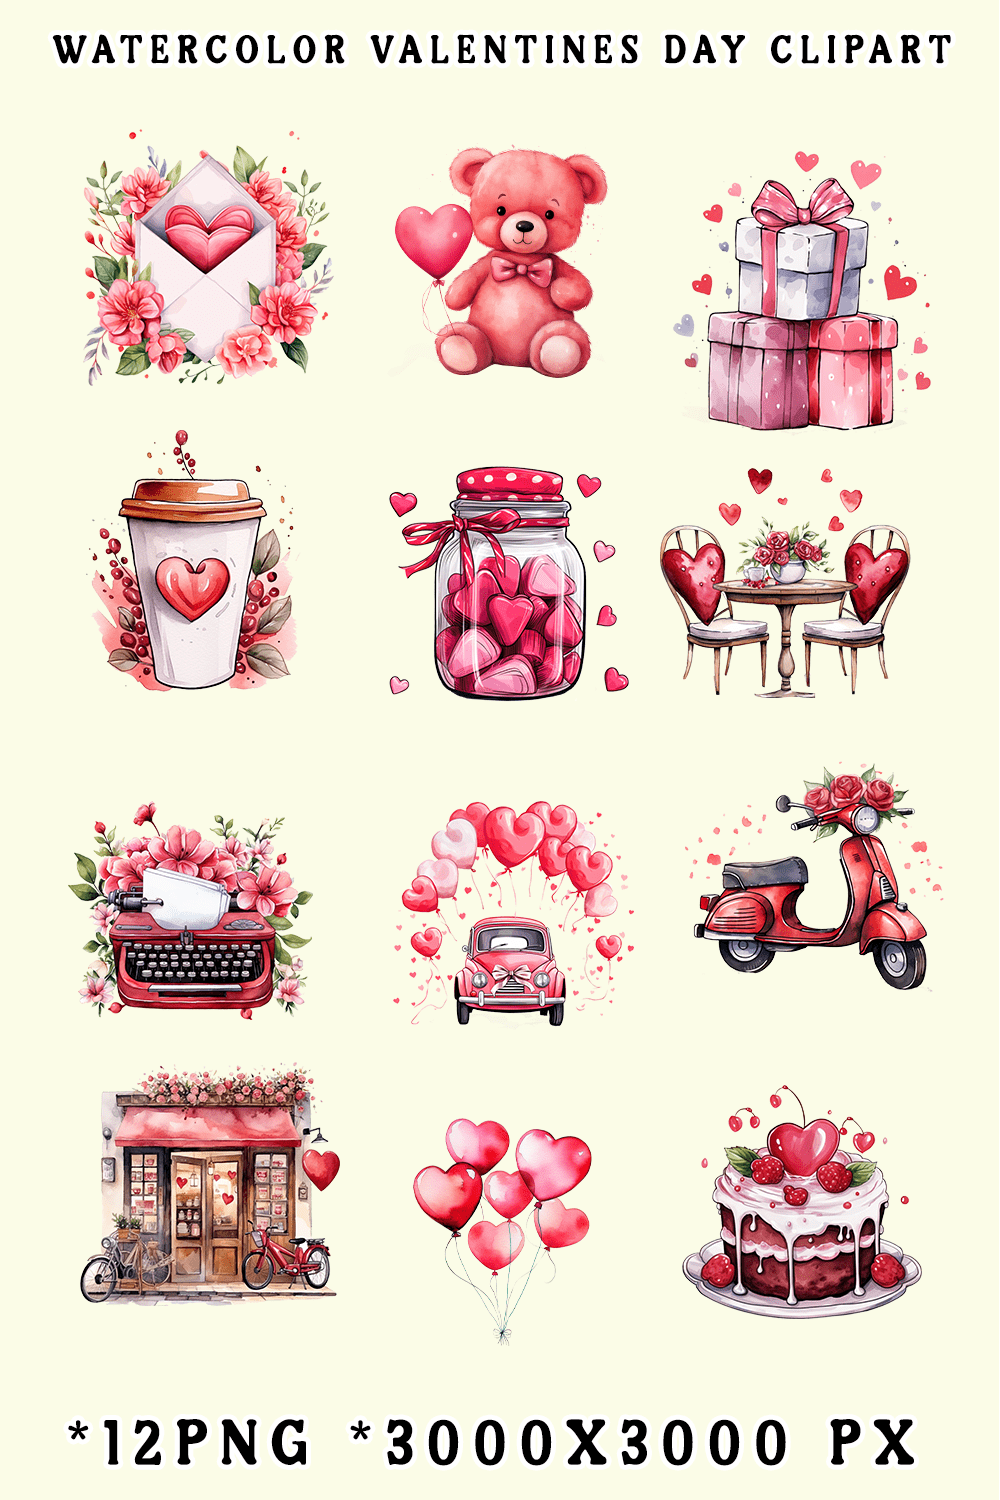 Watercolor Valentines Day Clipart pinterest preview image.